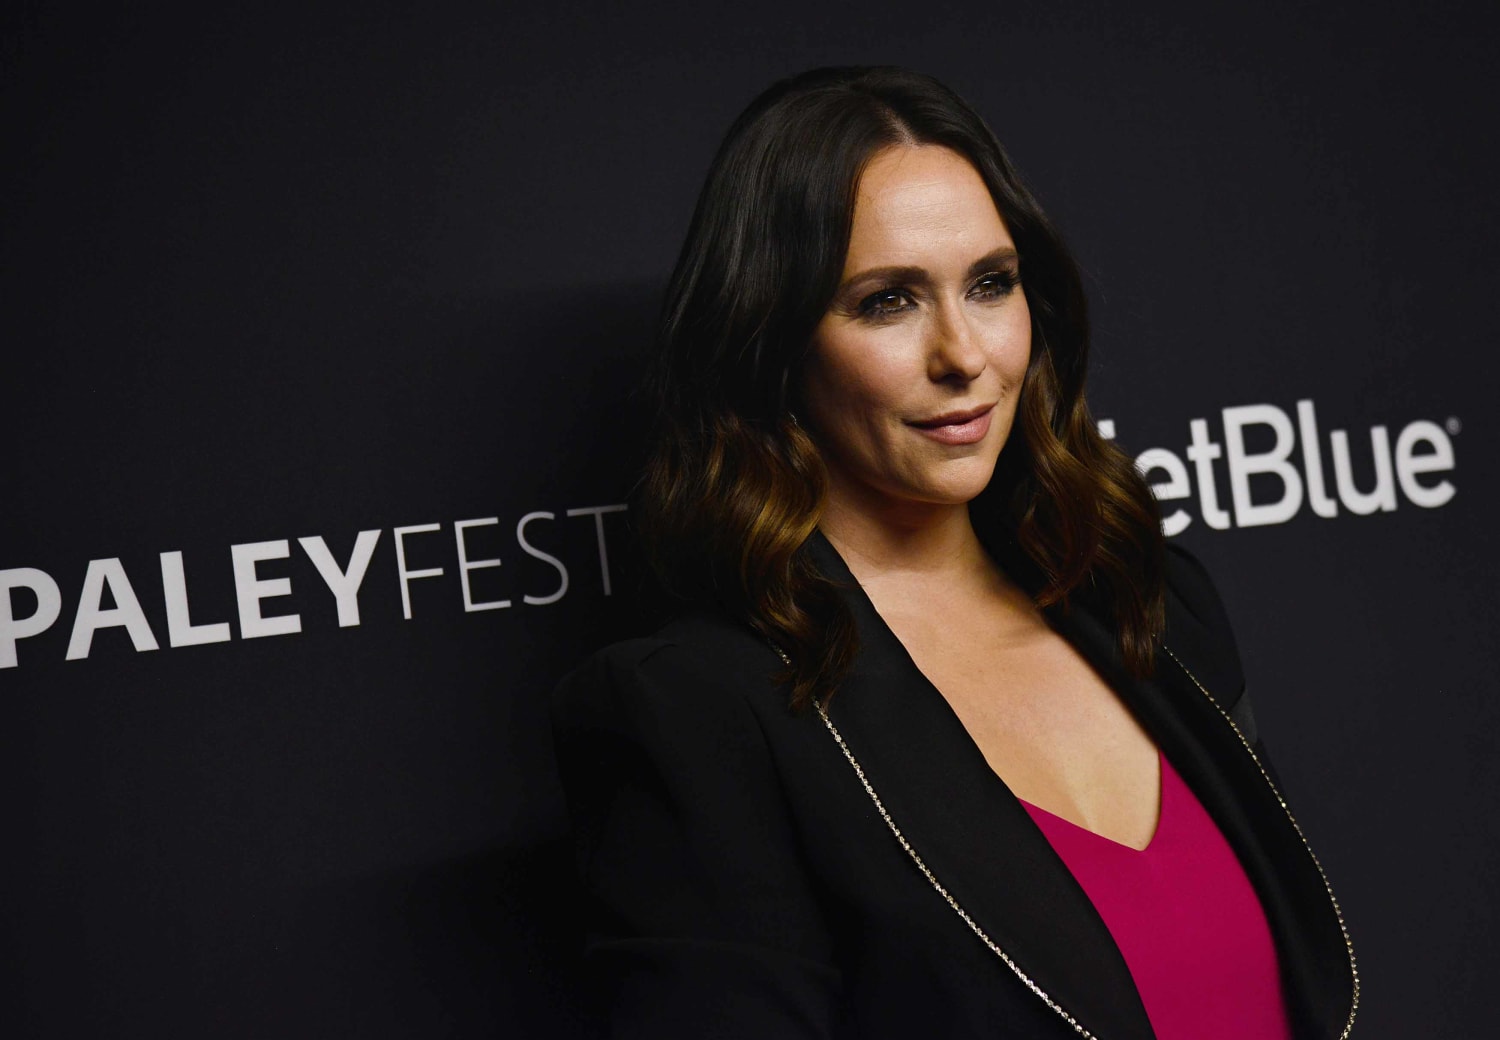 Jennifer Love Hewitt shows her three kids for the first time on her new book cover